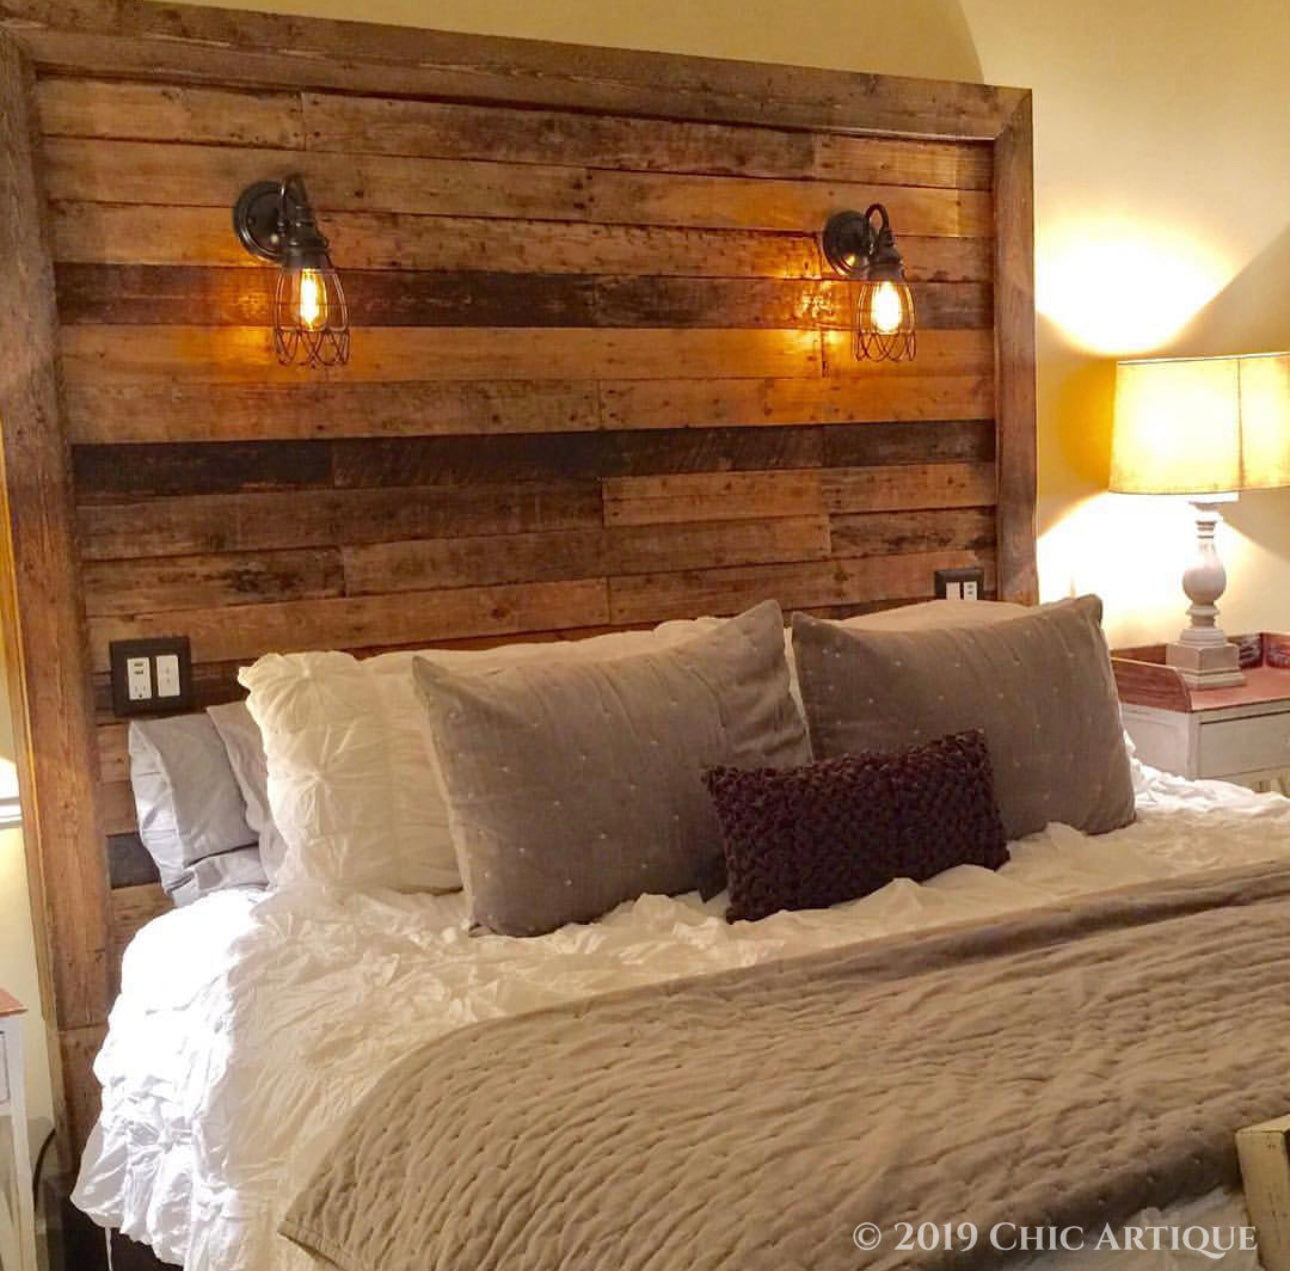 Lighted Headboard Cage Lights Chic Artique